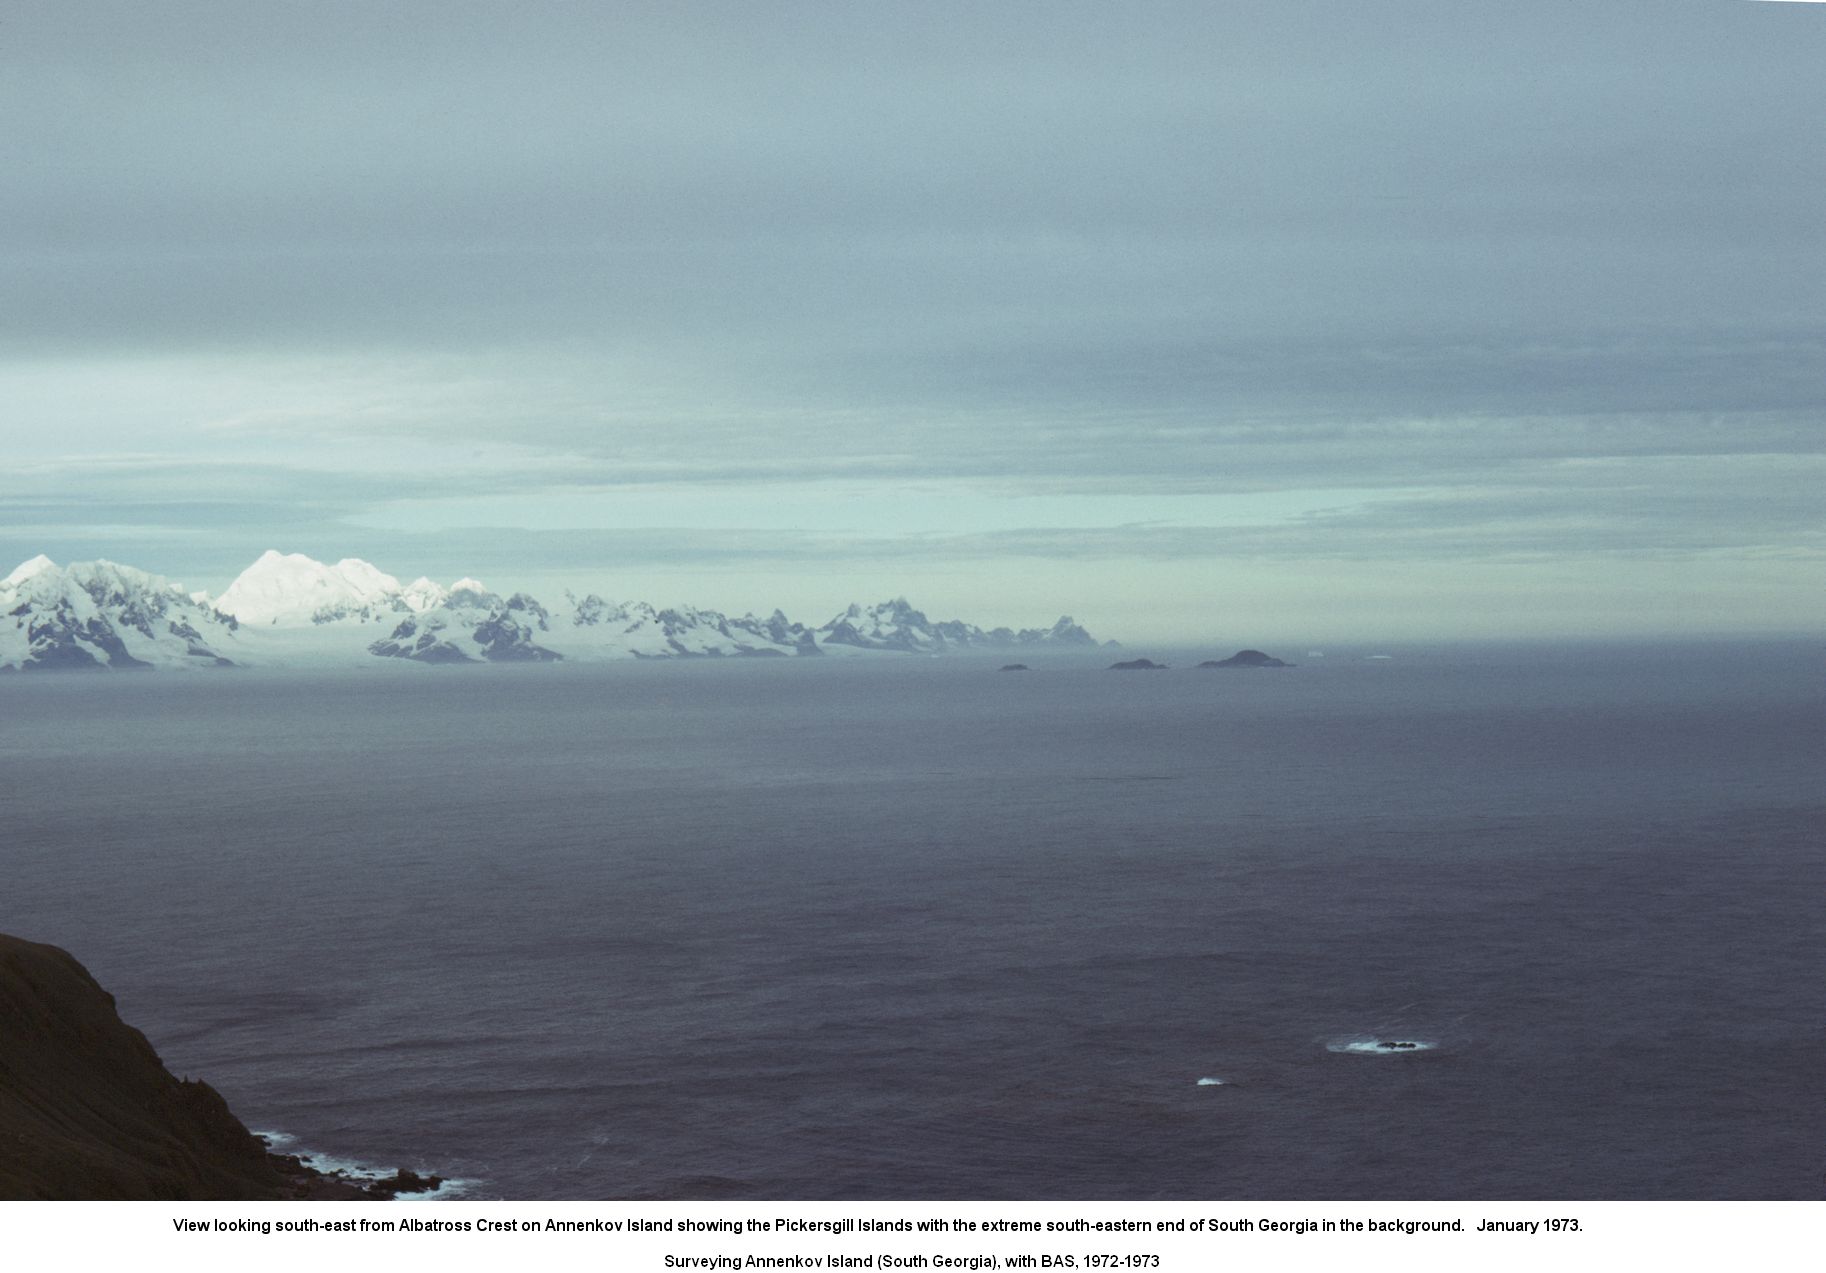 View looking south-east from Albatross Crest on Annenkov Island showing the Pickersgill Islands with the extreme south-eastern end of South Georgia in the background. January 1973.